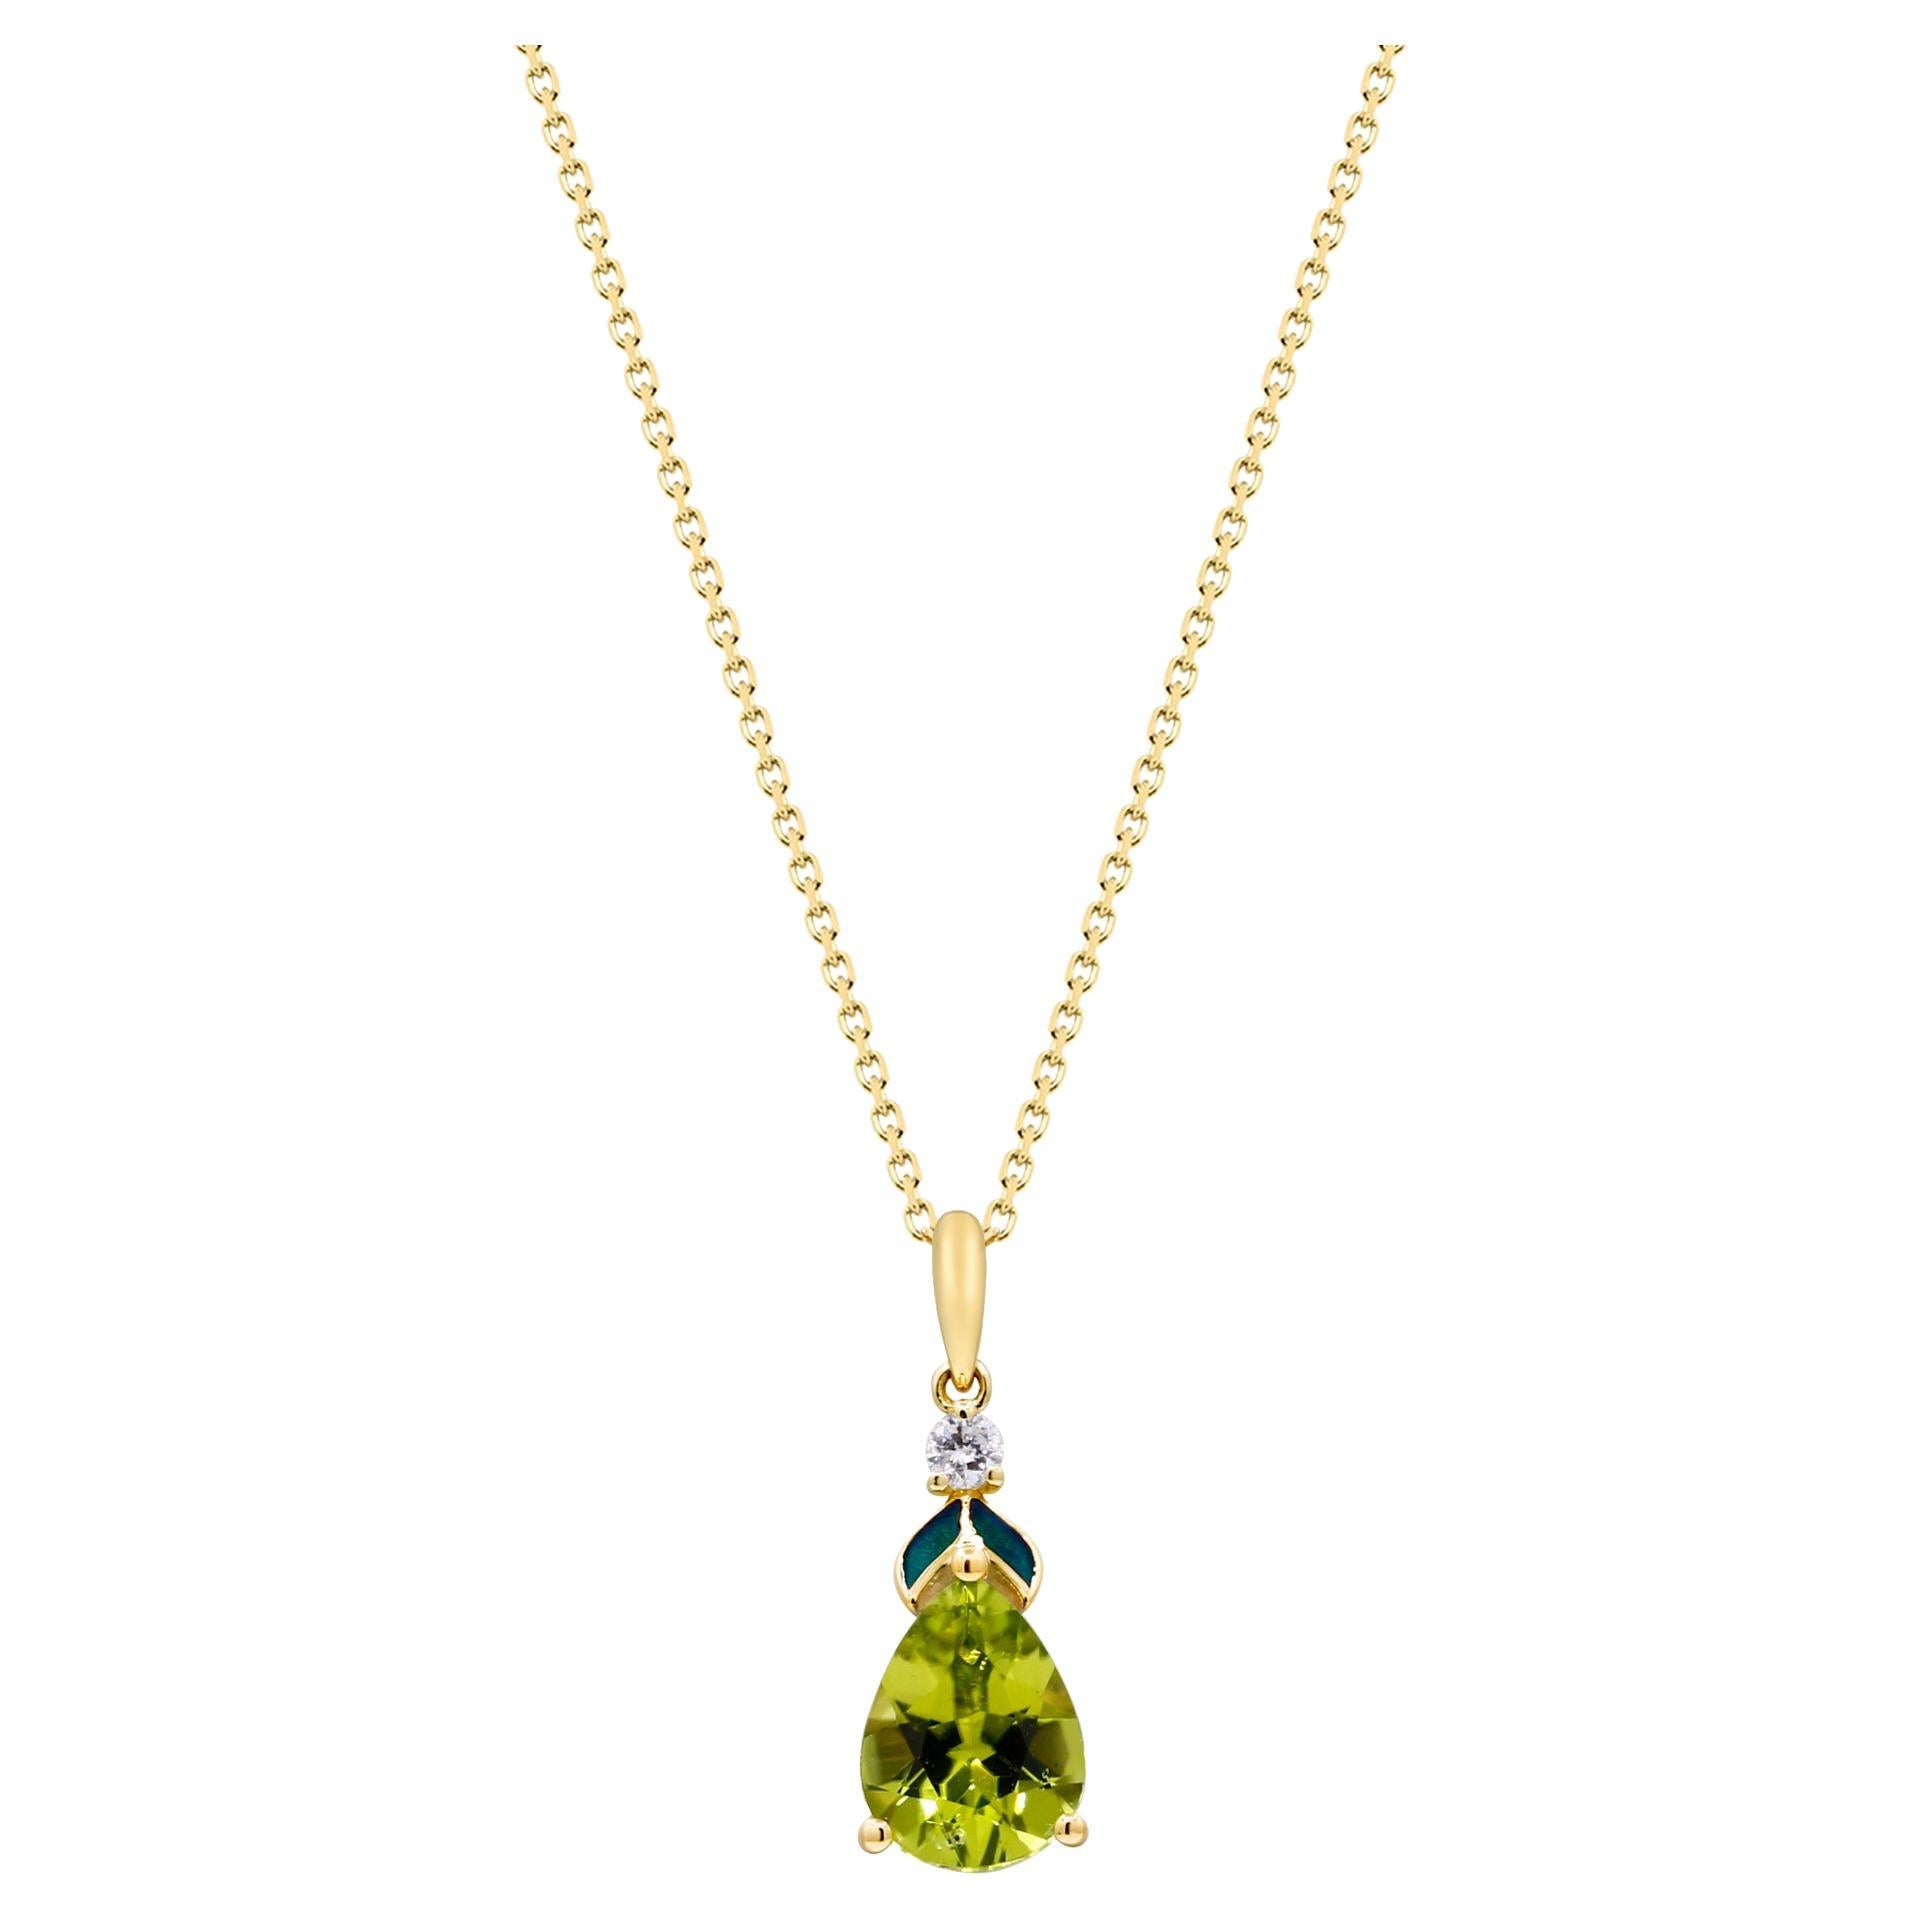 1.75 Carat Pear-Cut Peridot with Diamond Accents 10K Yellow Gold Pendant For Sale